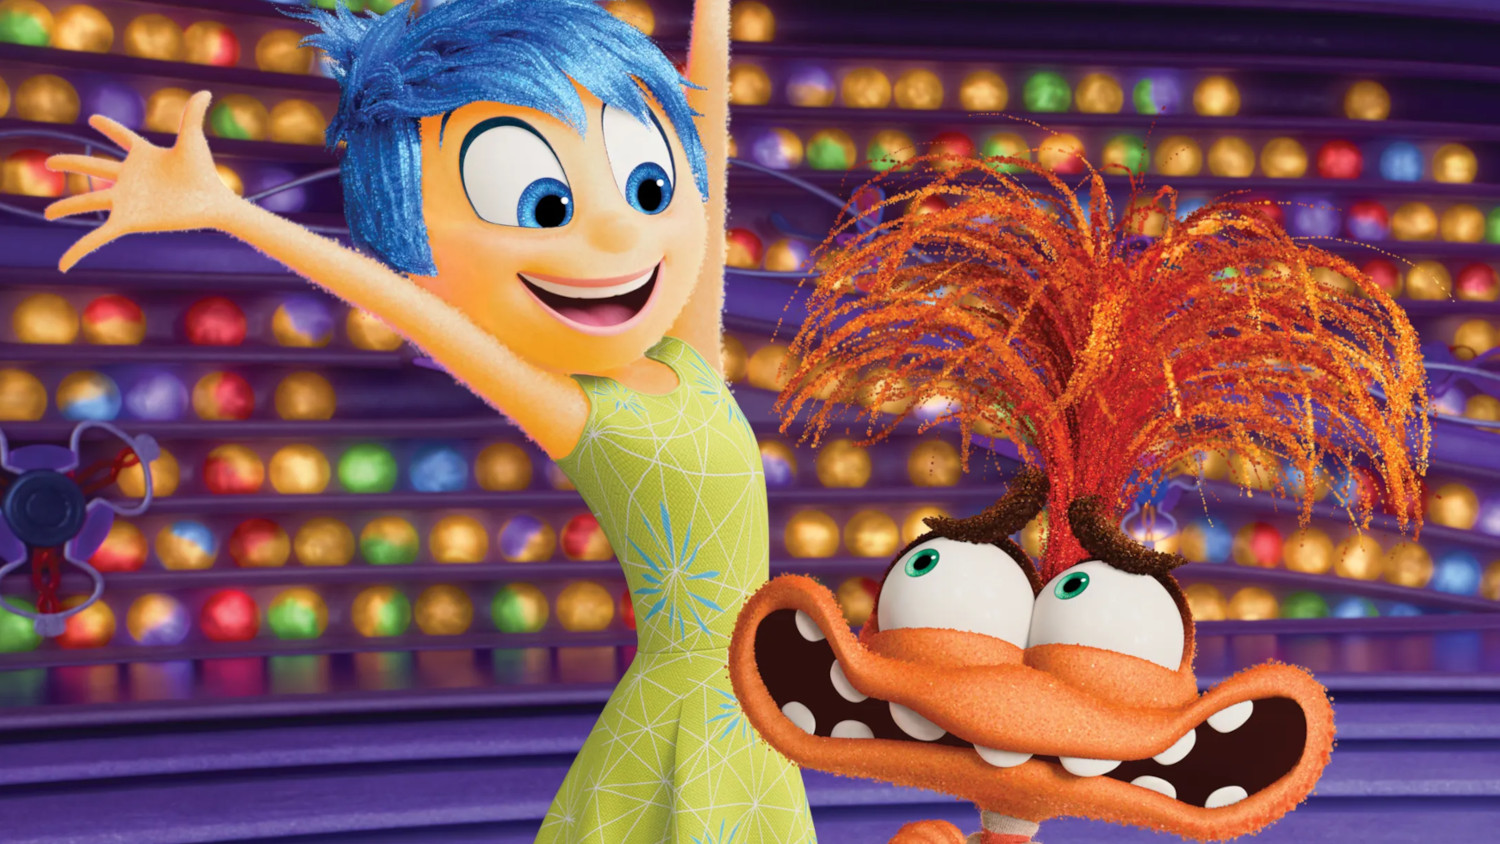 Inside Out 2 Box Office Projected Huge: $140M Opening: Rotten Tomatoes Score Big